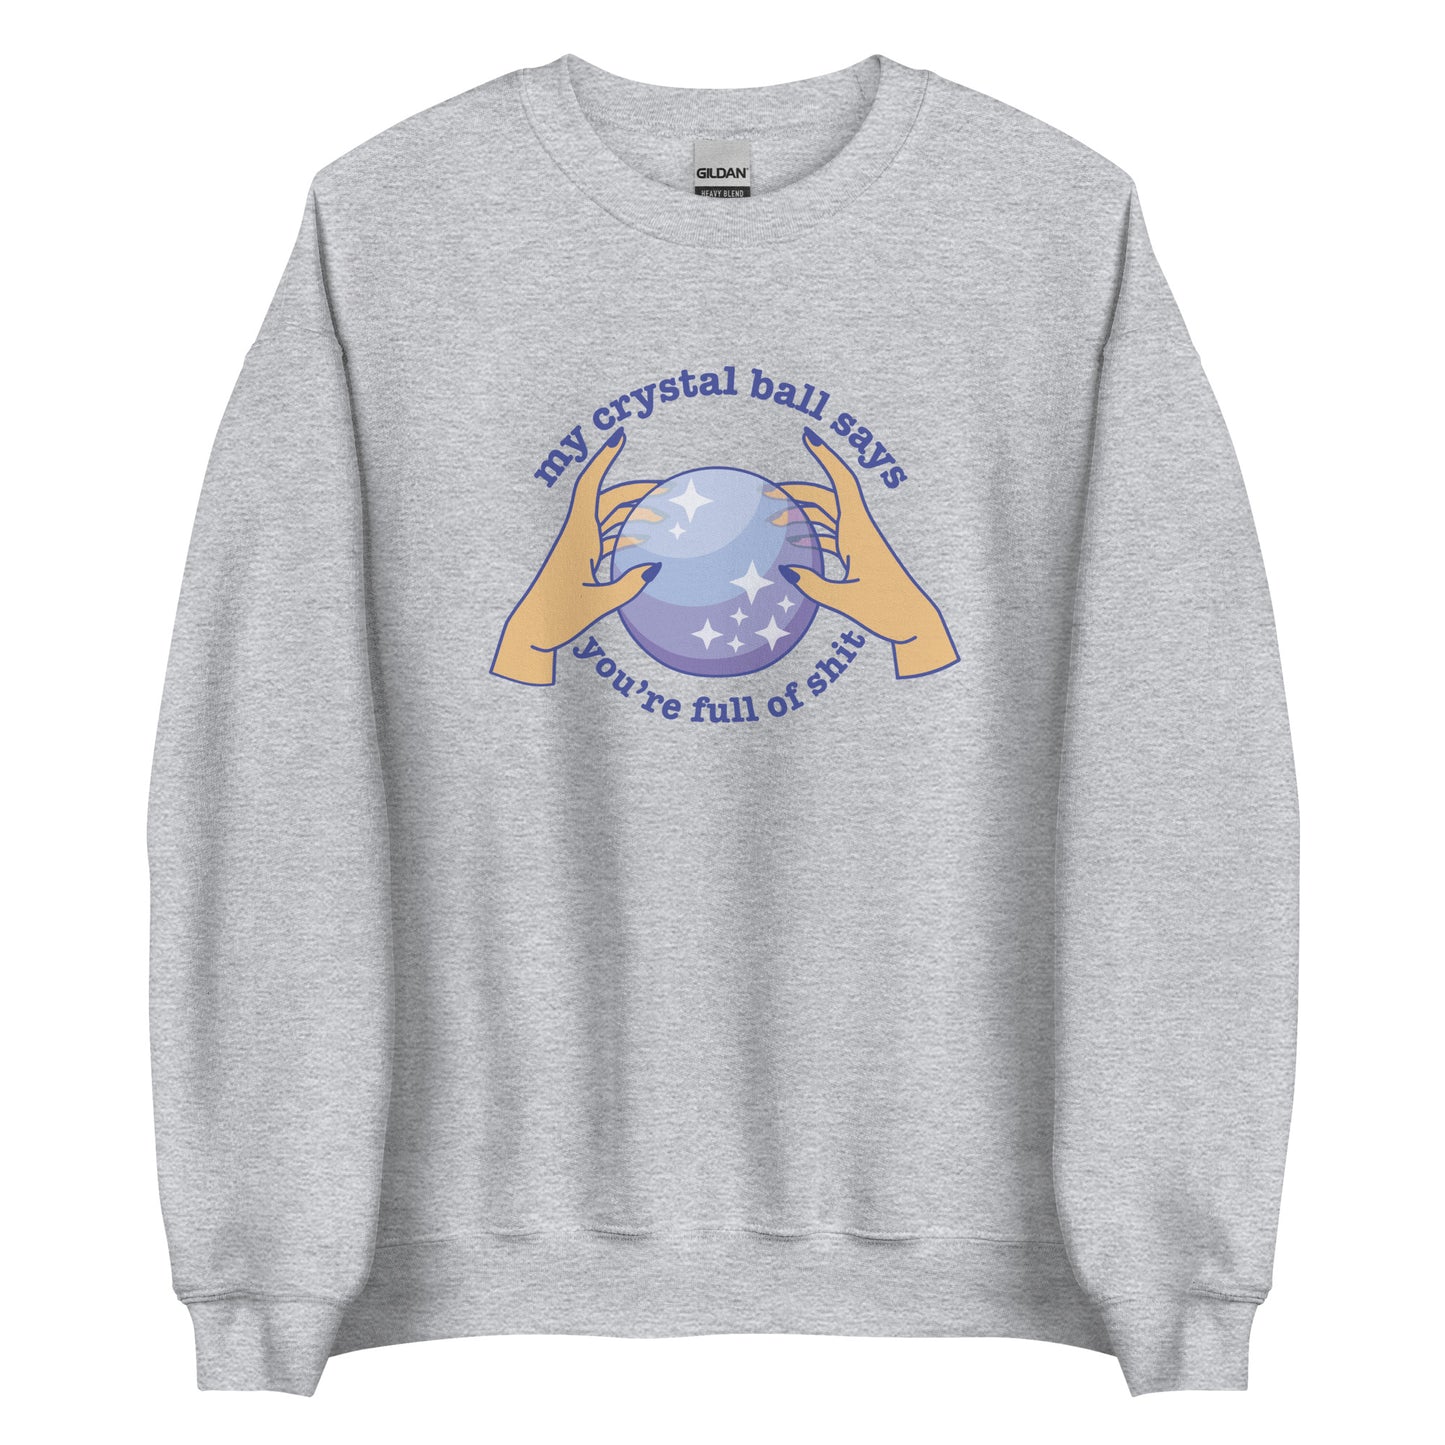 A light grey crewneck sweatshirt with a picture of hands on a crystal ball and text reading "My crystal ball says you're full of shit"